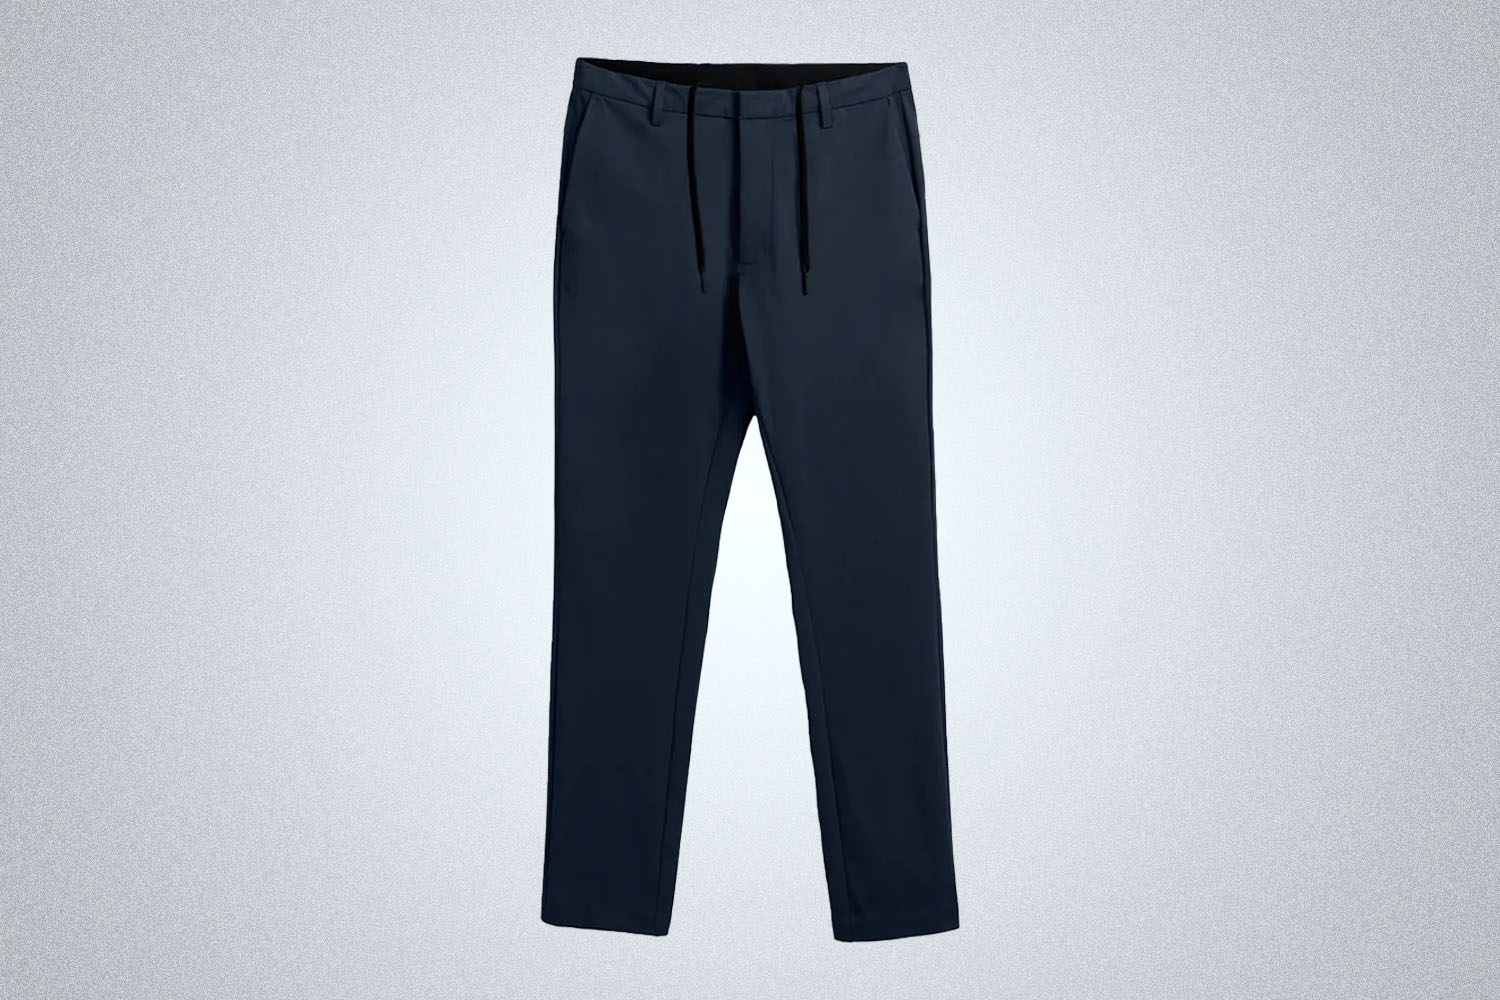 a blue trouser from Ministry of Supply on a grey background